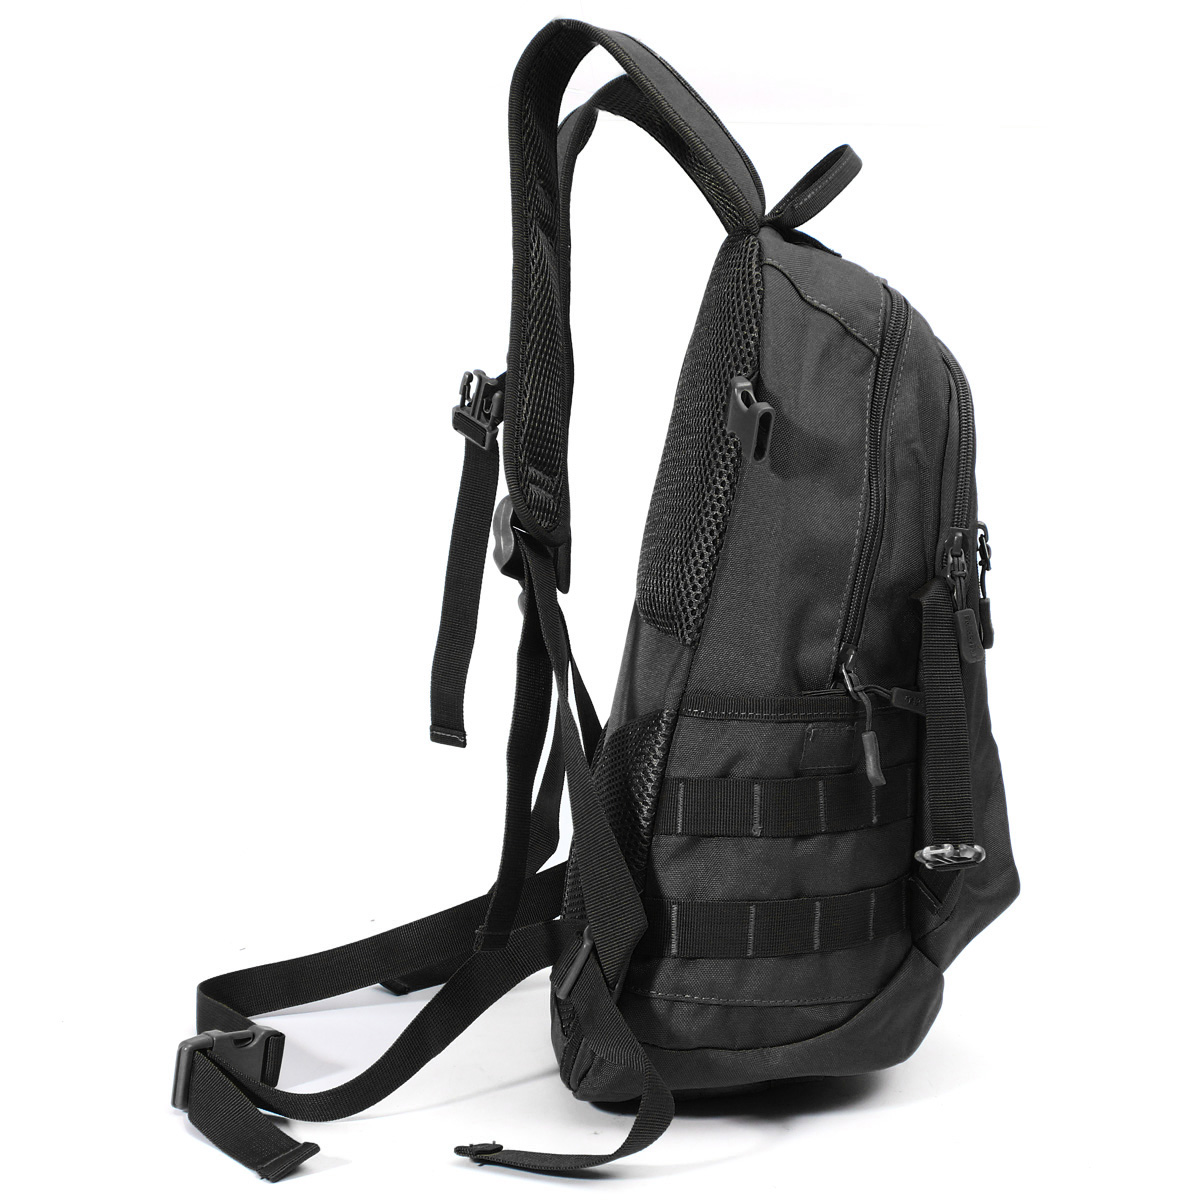 Ultralight-Molle-Tactical-Backpack-800D-Oxford-Military-Hiking-Bicycle-Backpack-Outdoor-Sports-Cycli-1817007-3